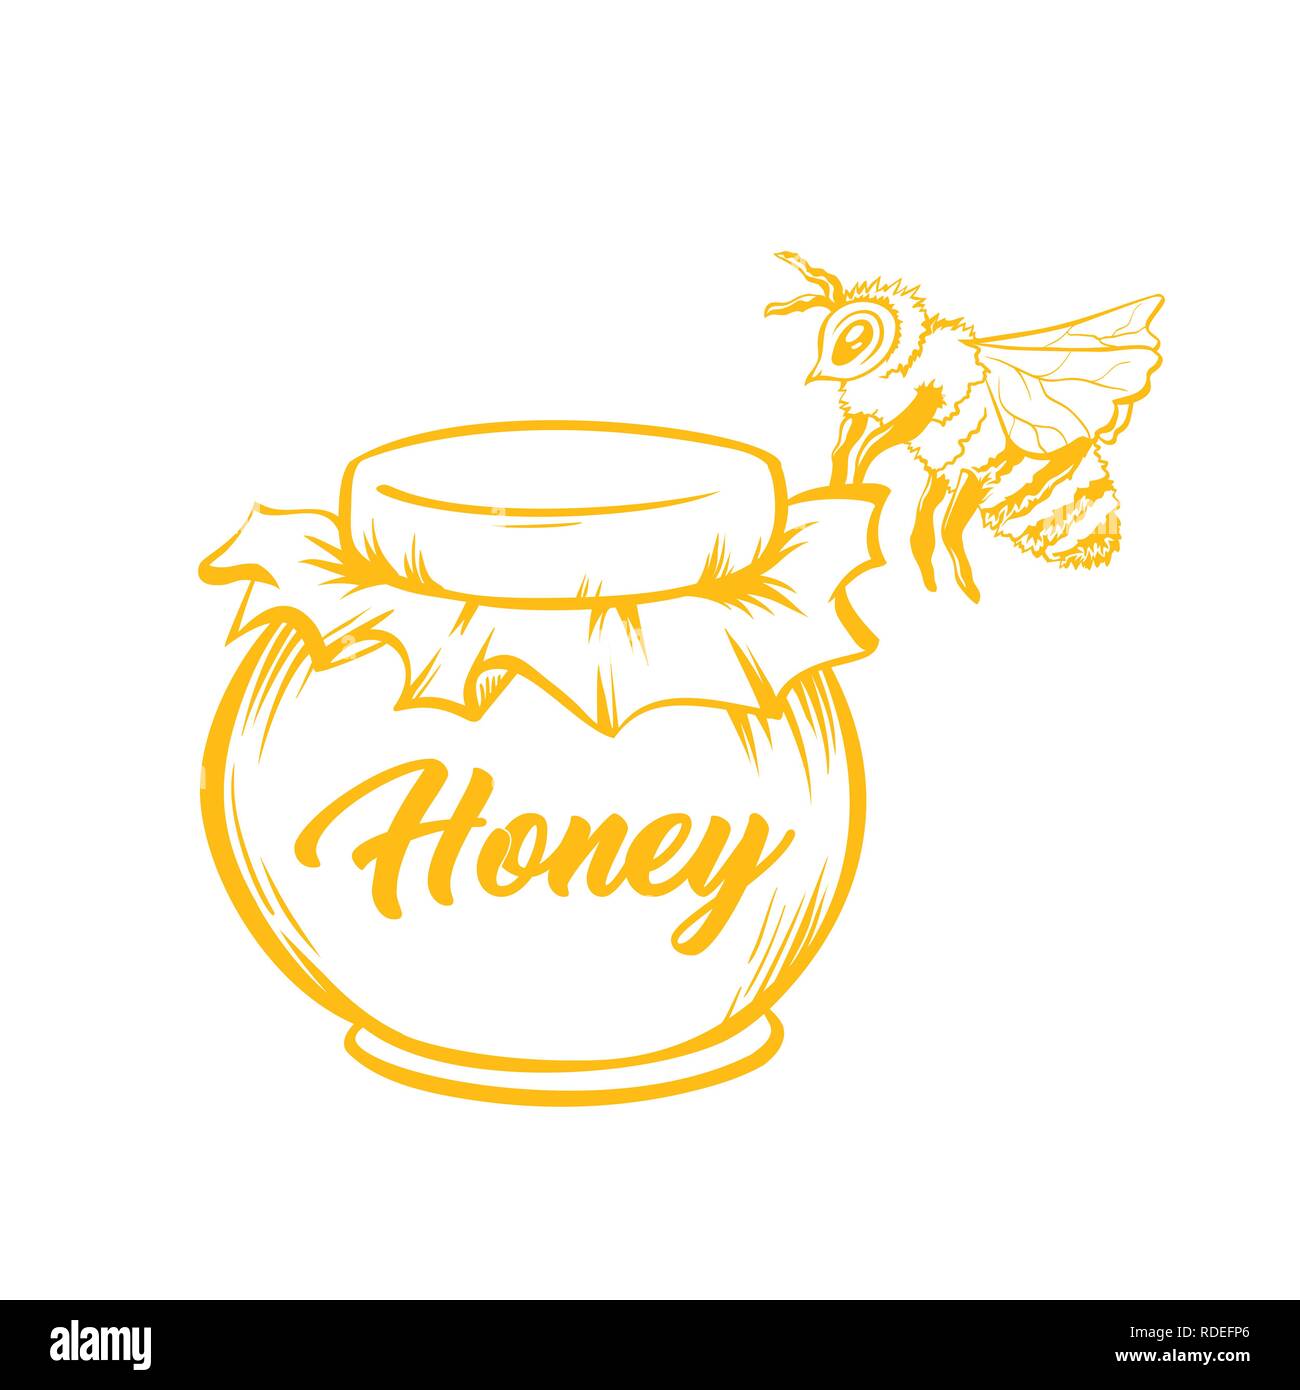 Honey Bee, Outline Logo Design. Isolated Vector. Yellow Engraved Element. Vintage Style Illustration of Flying Wasp Stock Vector